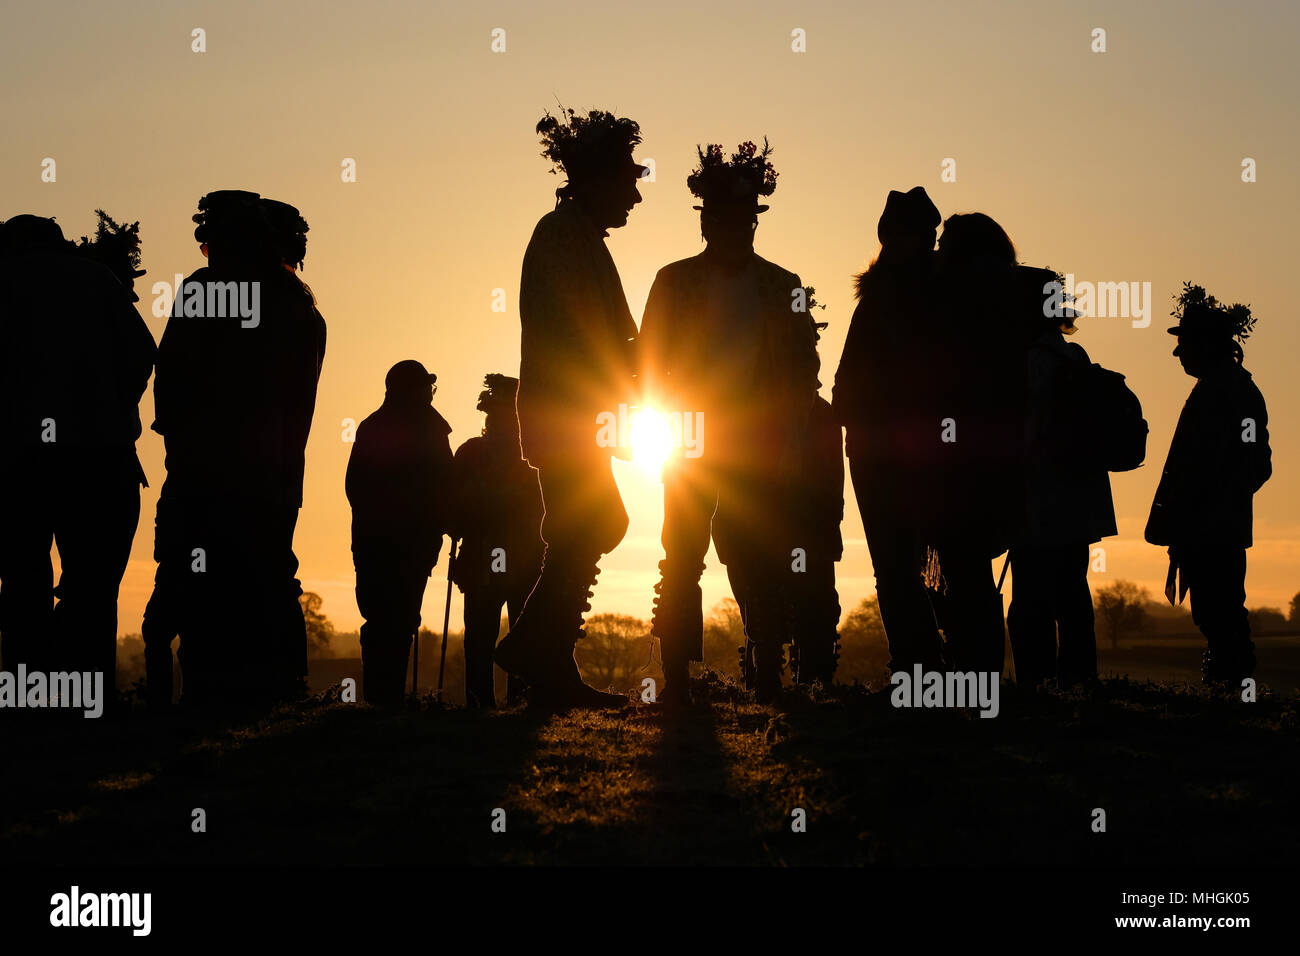 Bach Camp hillfort, Kimbolton, Herefordshire - Tuesday 1st May 2018 - Members of the Leominster Morris Men gather to celebrate the dawn sunrise on May Day on the ancient hillfort at Bach Camp.  Photo Steven May / Alamy Live News Stock Photo